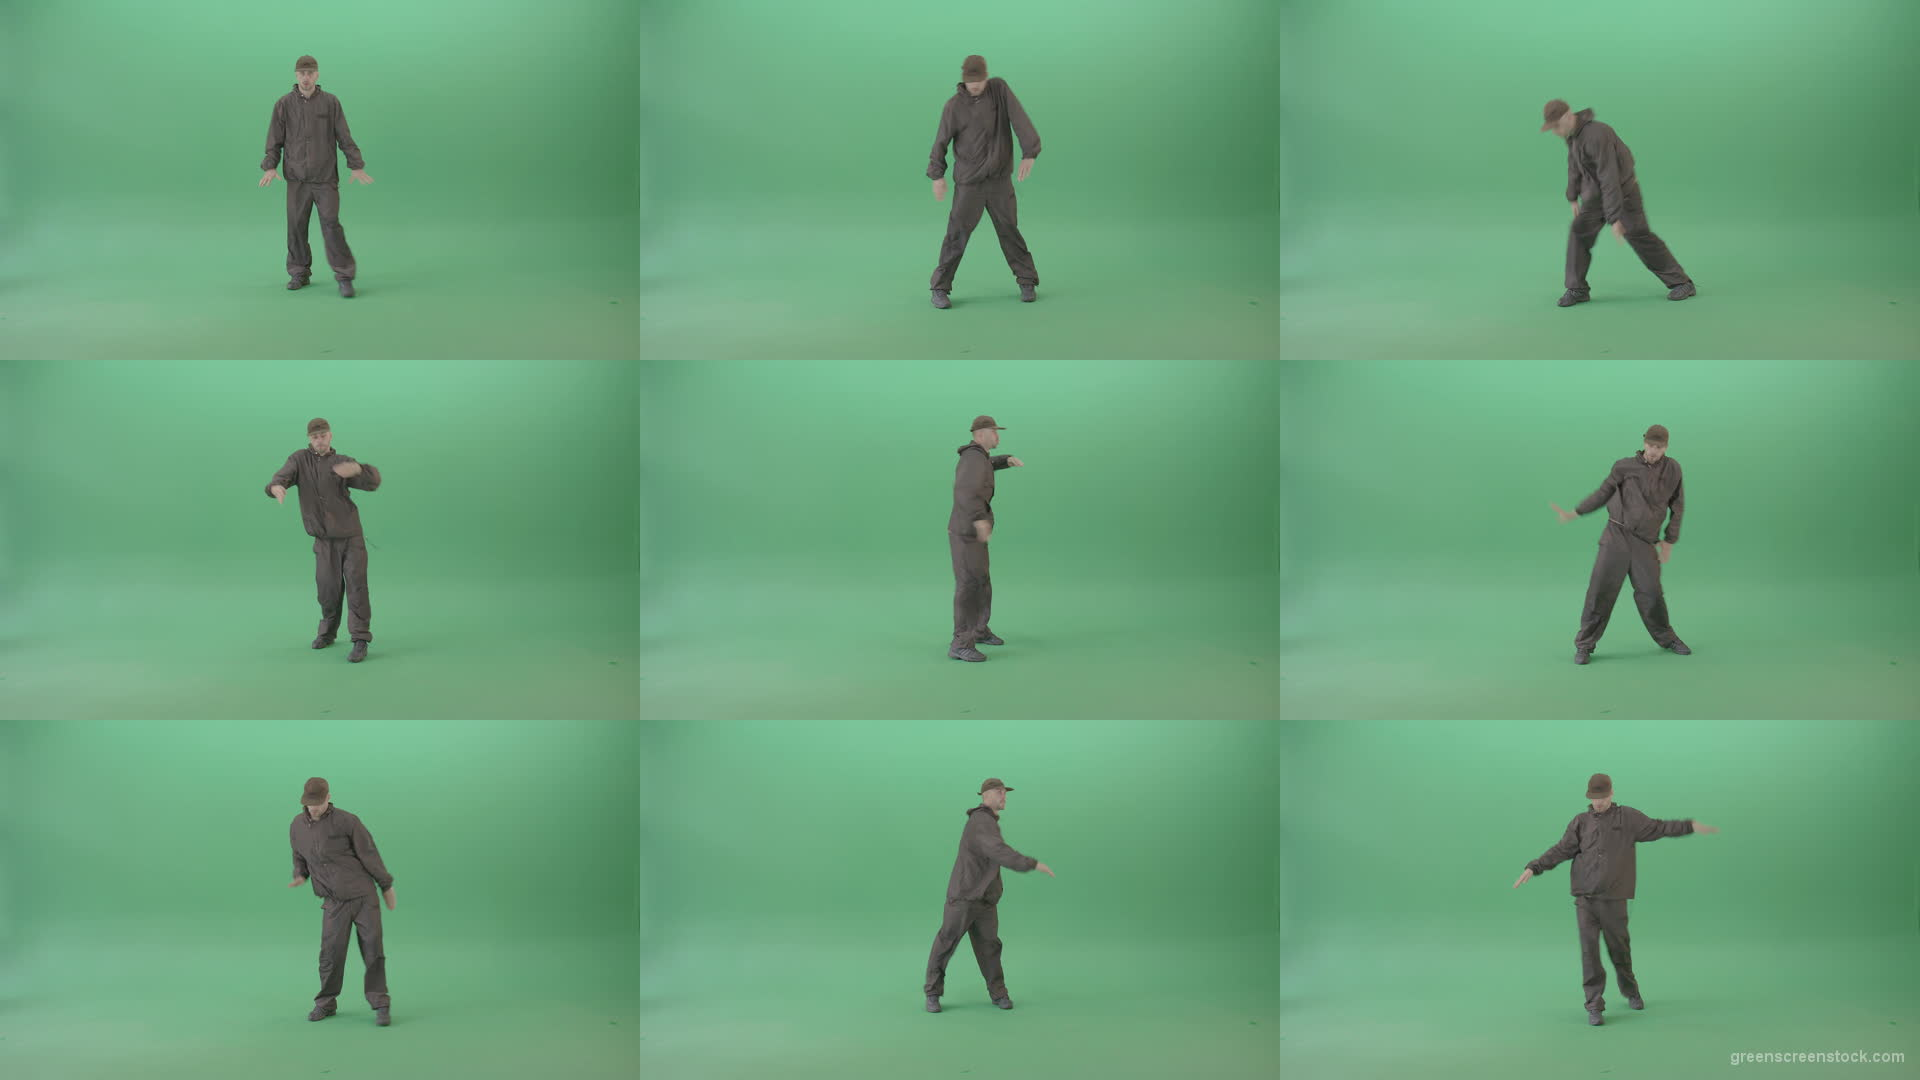 Top-Break-dance-by-electric-boogie-hip-hop-dancer-isolated-on-green-screen-4K-Video-Footage-1920 Green Screen Stock